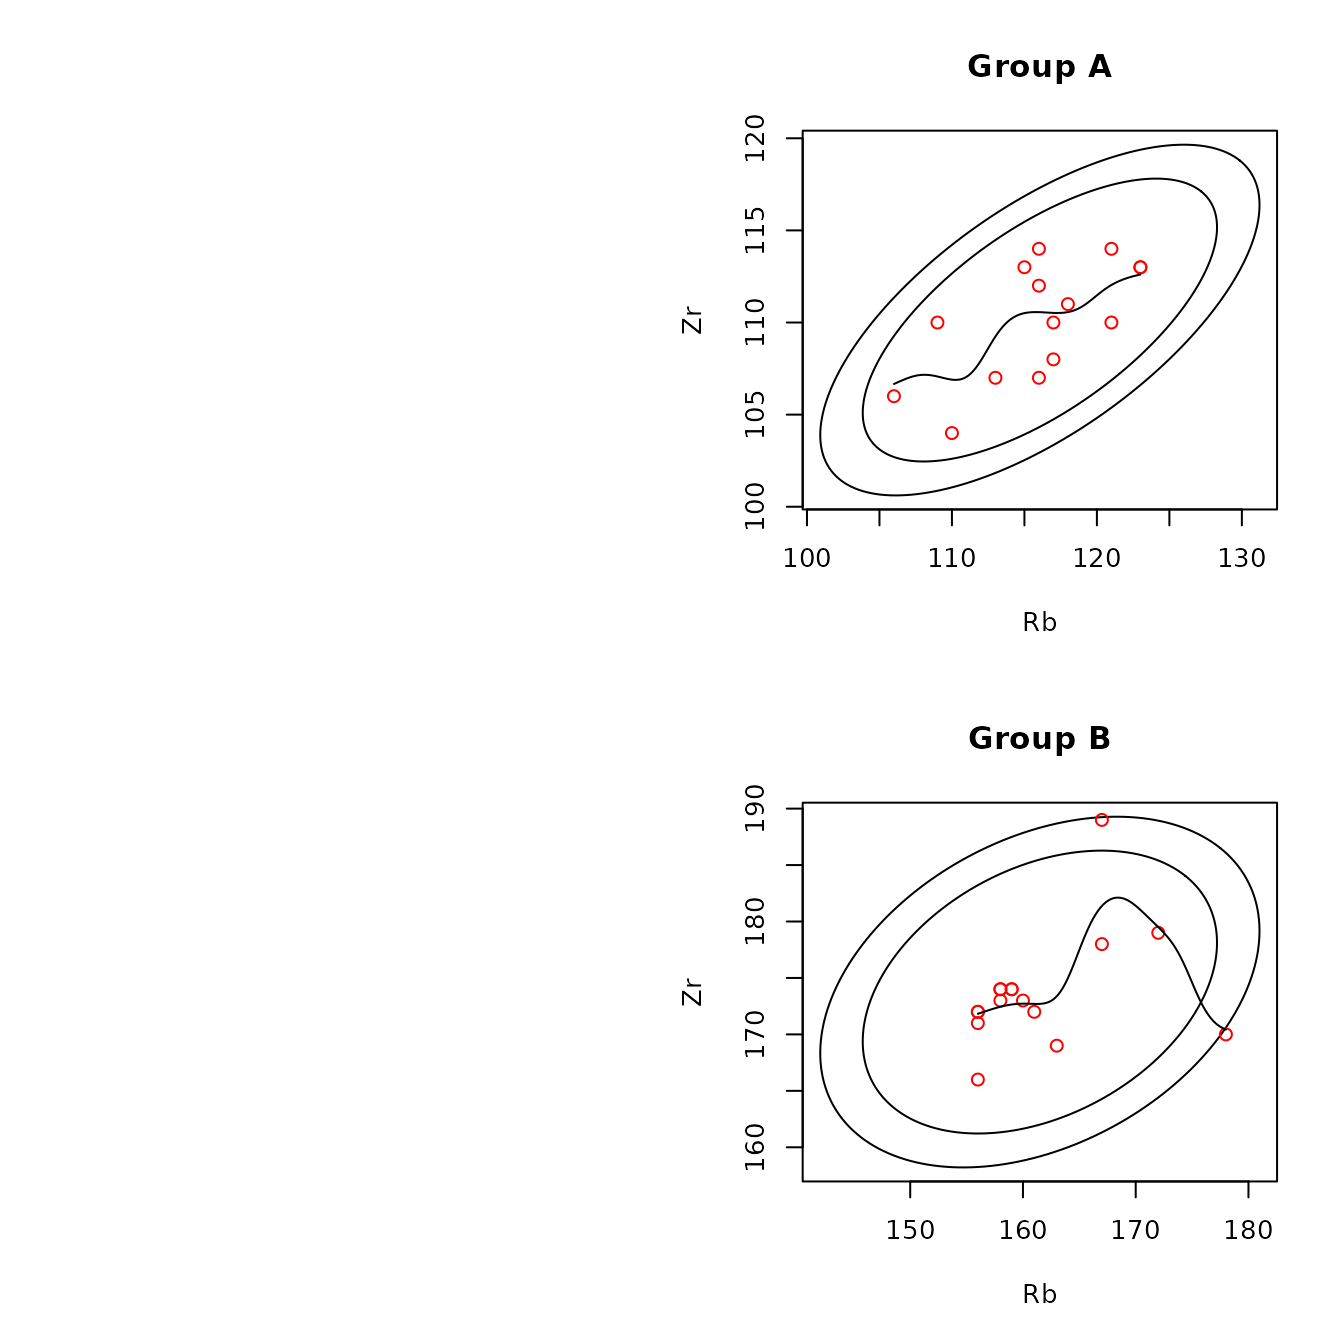 Figure 4.6: Example of a scatterplot for obsidian Jemez source data with confidence ellipses and kernel smoothing lines.